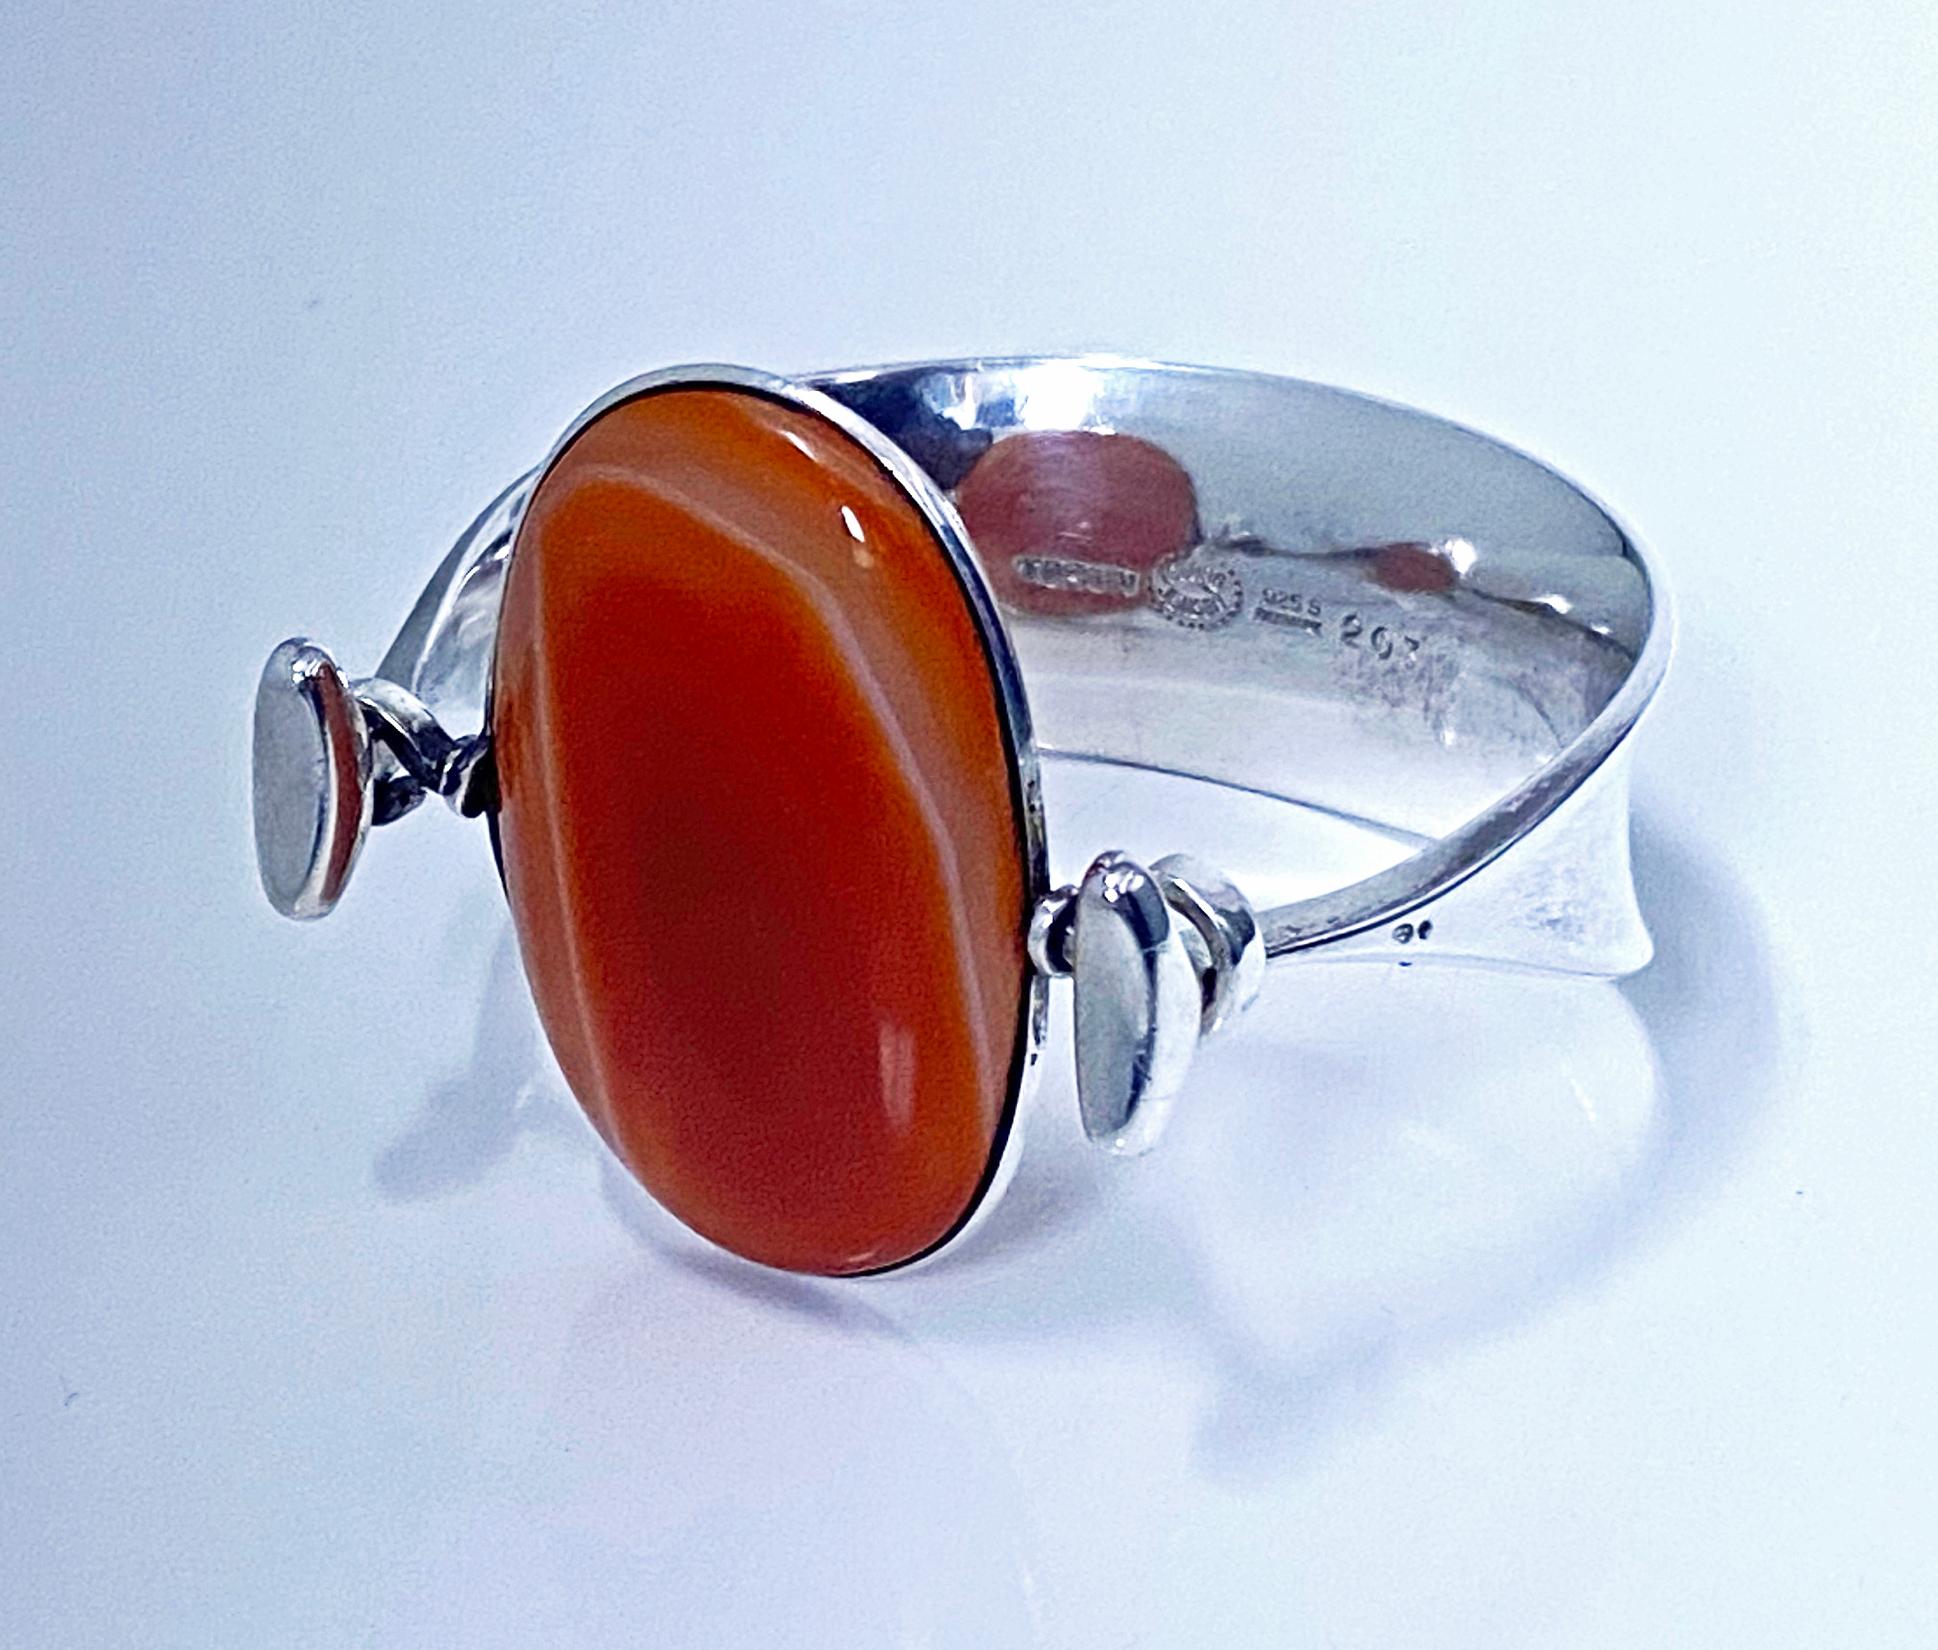 Georg Jensen Bangle with rare banded Red Agate model # 203 Designed by Vivianna Torun Bülow-Hübe C. 1969. Sterling Silver extremely rare design in red agate. Fits most wrists up to 6.5-7.0 inches, tension clamp opening. Approximate dimensions: